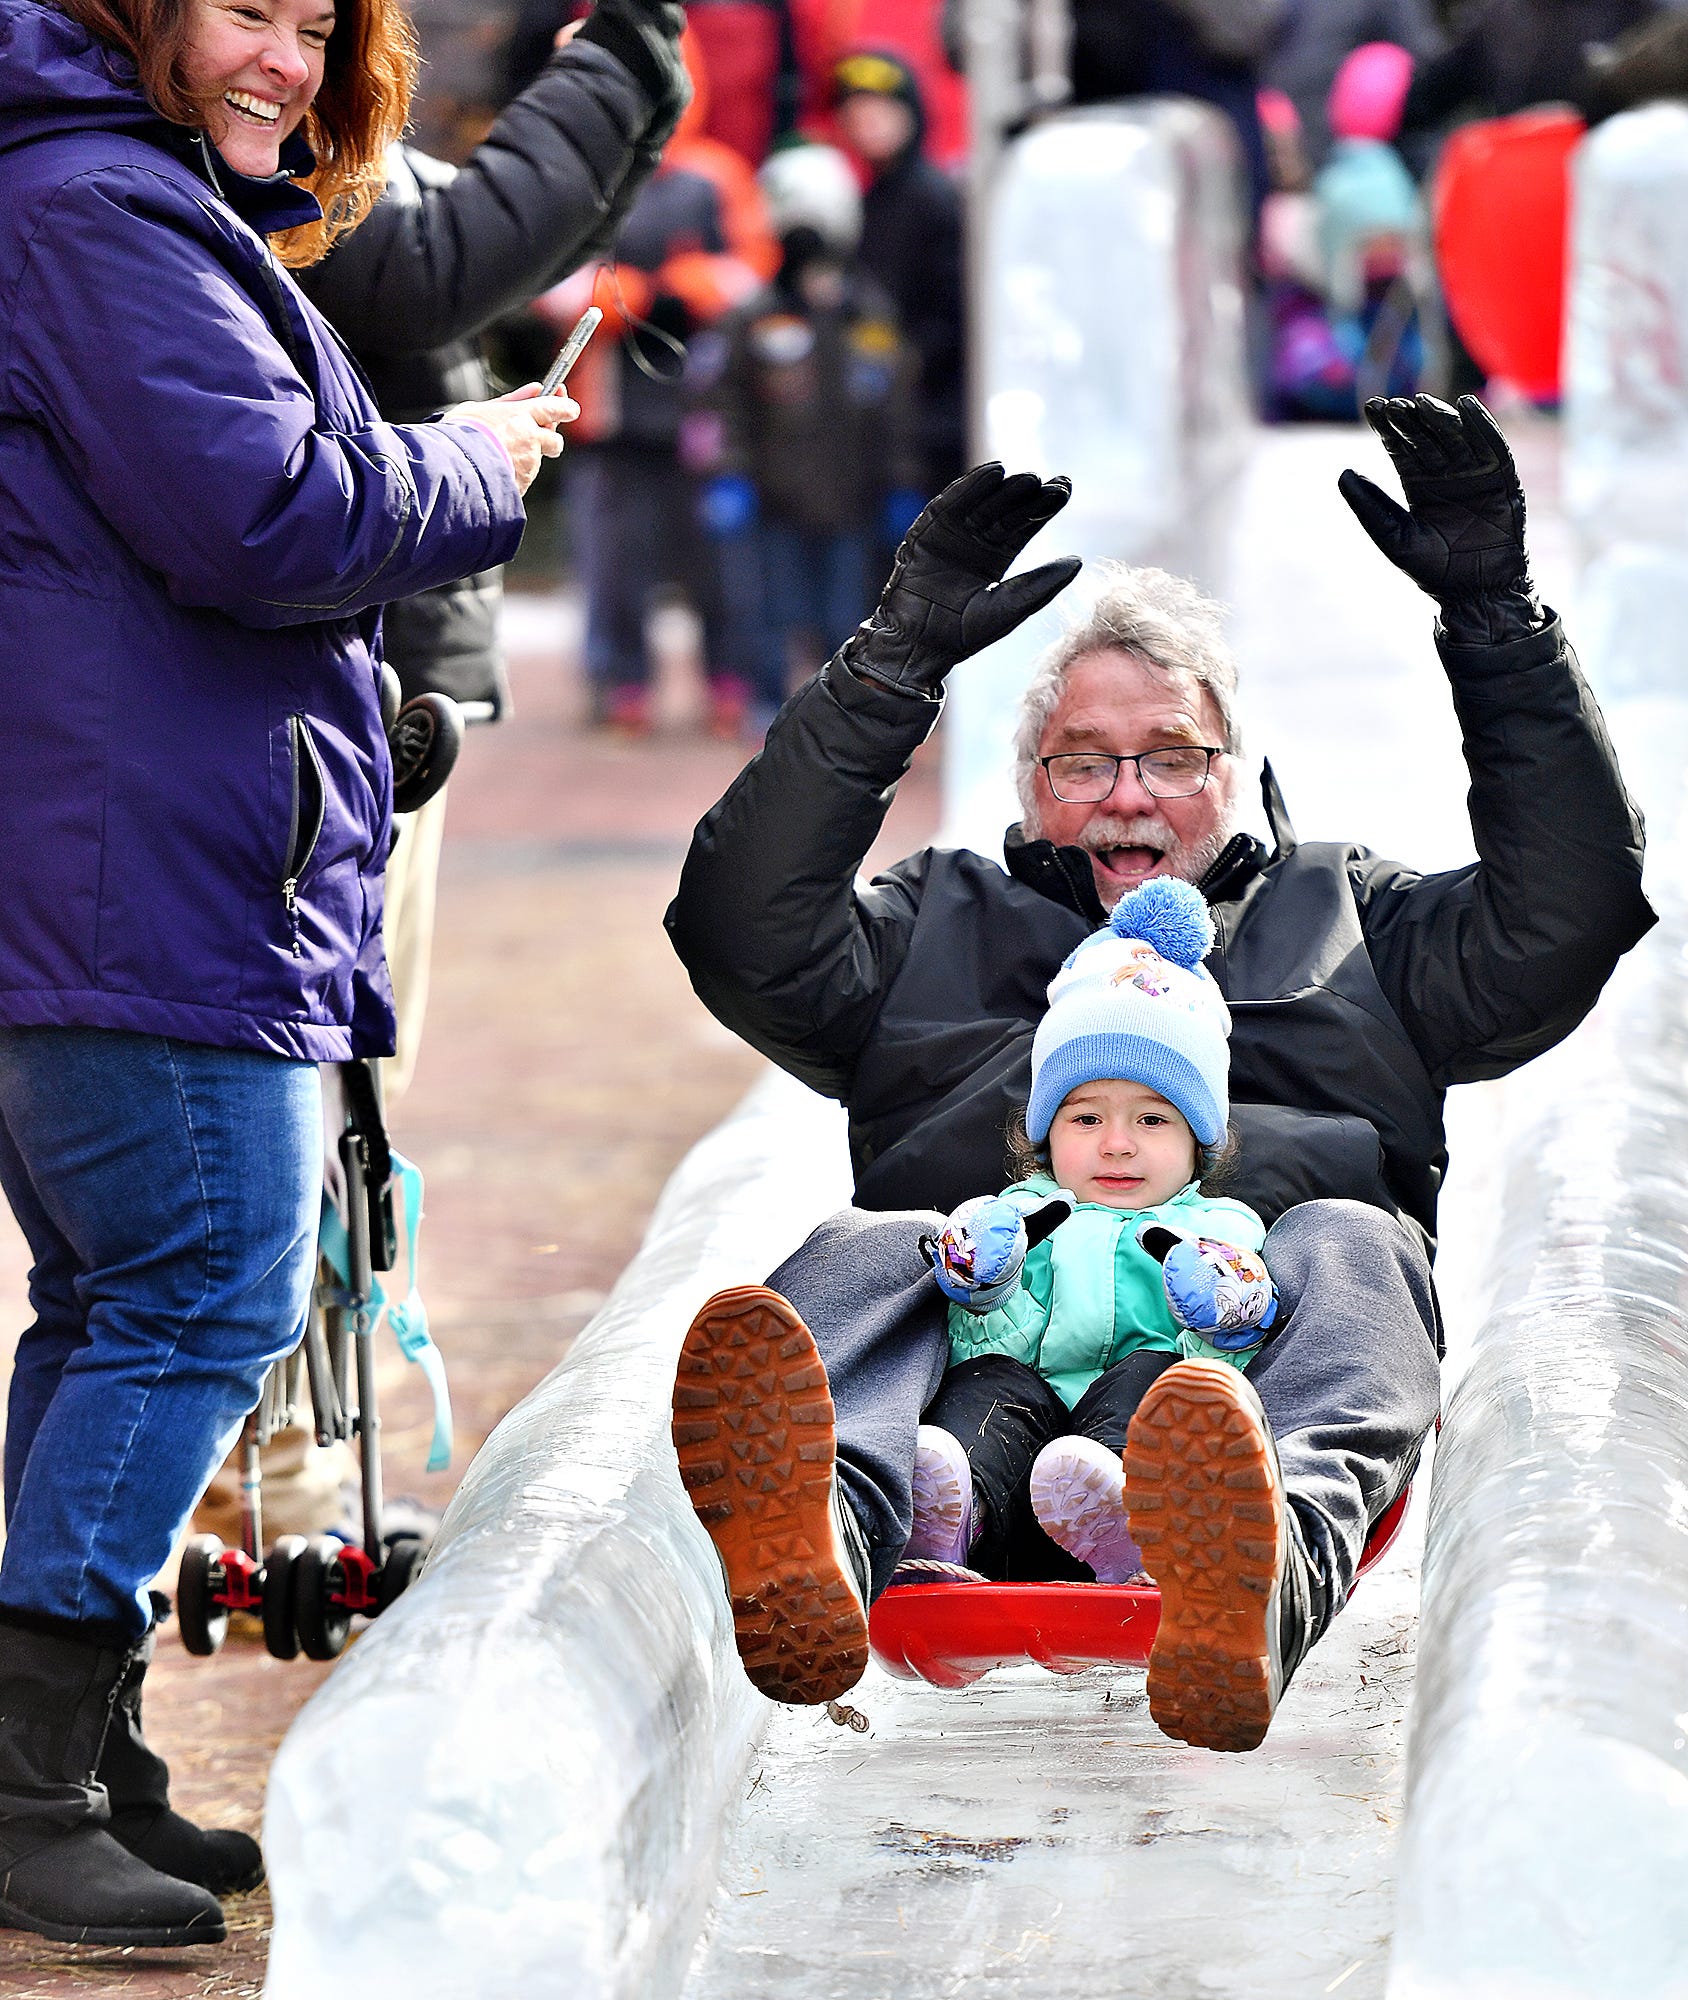 From left, Pam Murphy looks on as her husband Peter Murphy, both of Bethlehem, goes down the 40-foot WellSpan Ice Slide with their granddaughter Norah McComsey, 3, of Wrightsville, during the 8th annual FestivICE event in downtown York City, Saturday, Jan. 15, 2022. Dawn J. Sagert photo